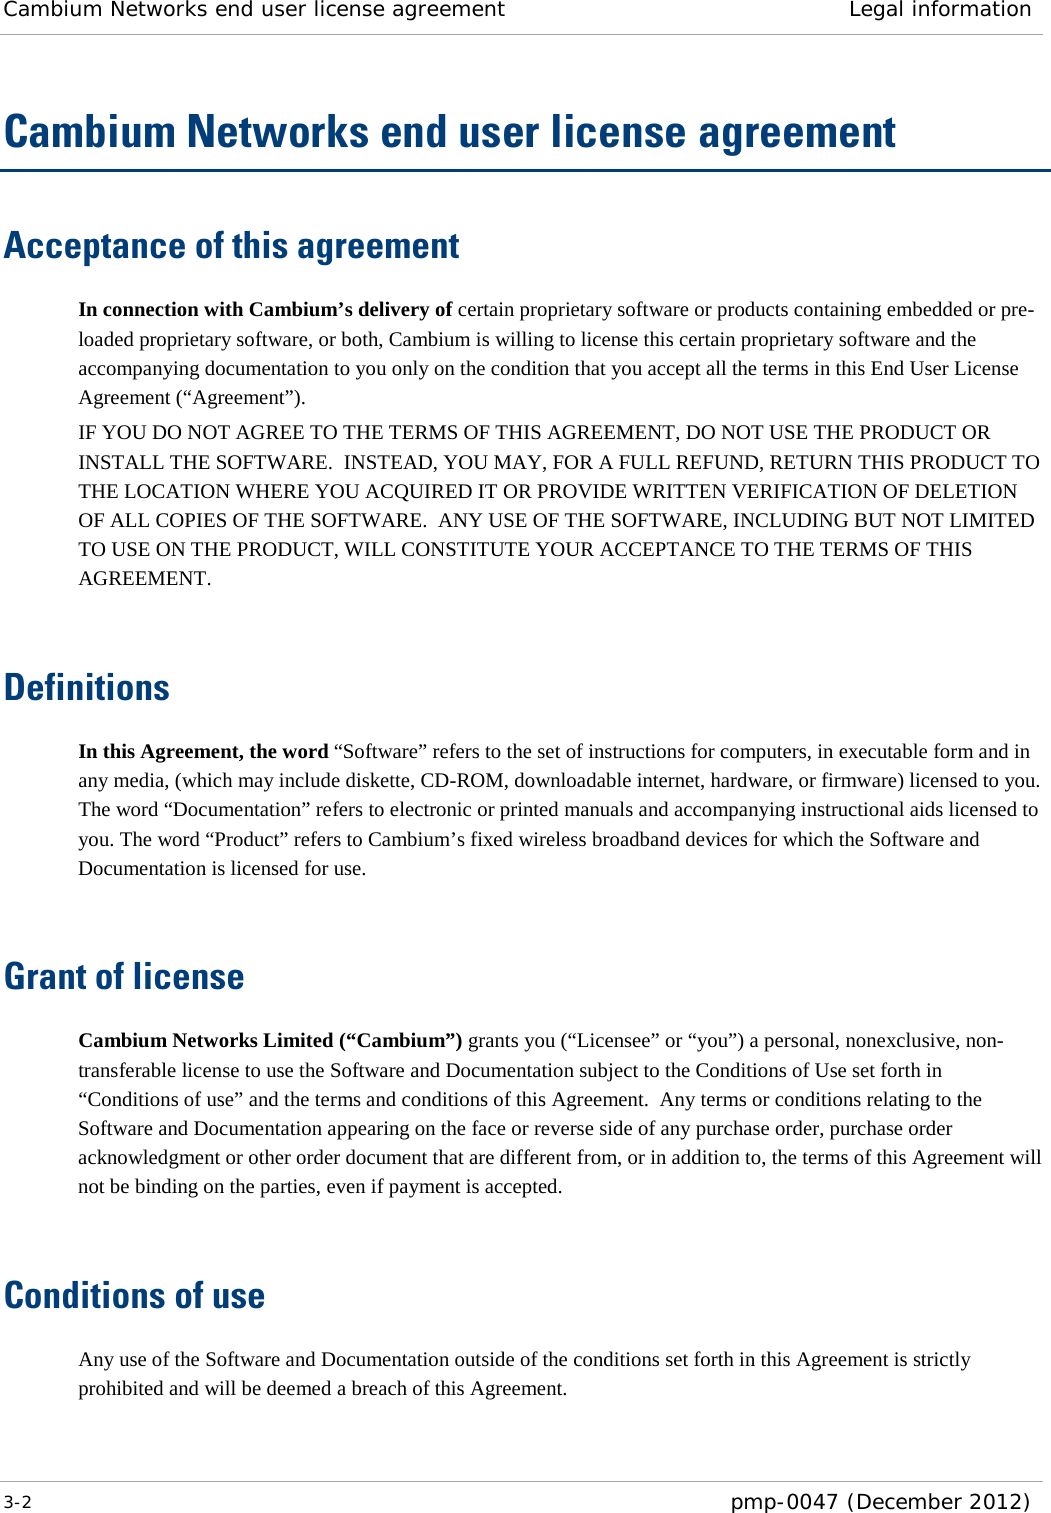 Cambium Networks end user license agreement Legal information  3-2  pmp-0047 (December 2012)  Cambium Networks end user license agreement Acceptance of this agreement In connection with Cambium’s delivery of certain proprietary software or products containing embedded or pre-loaded proprietary software, or both, Cambium is willing to license this certain proprietary software and the accompanying documentation to you only on the condition that you accept all the terms in this End User License Agreement (“Agreement”). IF YOU DO NOT AGREE TO THE TERMS OF THIS AGREEMENT, DO NOT USE THE PRODUCT OR INSTALL THE SOFTWARE.  INSTEAD, YOU MAY, FOR A FULL REFUND, RETURN THIS PRODUCT TO THE LOCATION WHERE YOU ACQUIRED IT OR PROVIDE WRITTEN VERIFICATION OF DELETION OF ALL COPIES OF THE SOFTWARE.  ANY USE OF THE SOFTWARE, INCLUDING BUT NOT LIMITED TO USE ON THE PRODUCT, WILL CONSTITUTE YOUR ACCEPTANCE TO THE TERMS OF THIS AGREEMENT.   Definitions In this Agreement, the word “Software” refers to the set of instructions for computers, in executable form and in any media, (which may include diskette, CD-ROM, downloadable internet, hardware, or firmware) licensed to you.  The word “Documentation” refers to electronic or printed manuals and accompanying instructional aids licensed to you. The word “Product” refers to Cambium’s fixed wireless broadband devices for which the Software and Documentation is licensed for use.   Grant of license Cambium Networks Limited (“Cambium”) grants you (“Licensee” or “you”) a personal, nonexclusive, non-transferable license to use the Software and Documentation subject to the Conditions of Use set forth in “Conditions of use” and the terms and conditions of this Agreement.  Any terms or conditions relating to the Software and Documentation appearing on the face or reverse side of any purchase order, purchase order acknowledgment or other order document that are different from, or in addition to, the terms of this Agreement will not be binding on the parties, even if payment is accepted.   Conditions of use Any use of the Software and Documentation outside of the conditions set forth in this Agreement is strictly prohibited and will be deemed a breach of this Agreement.  